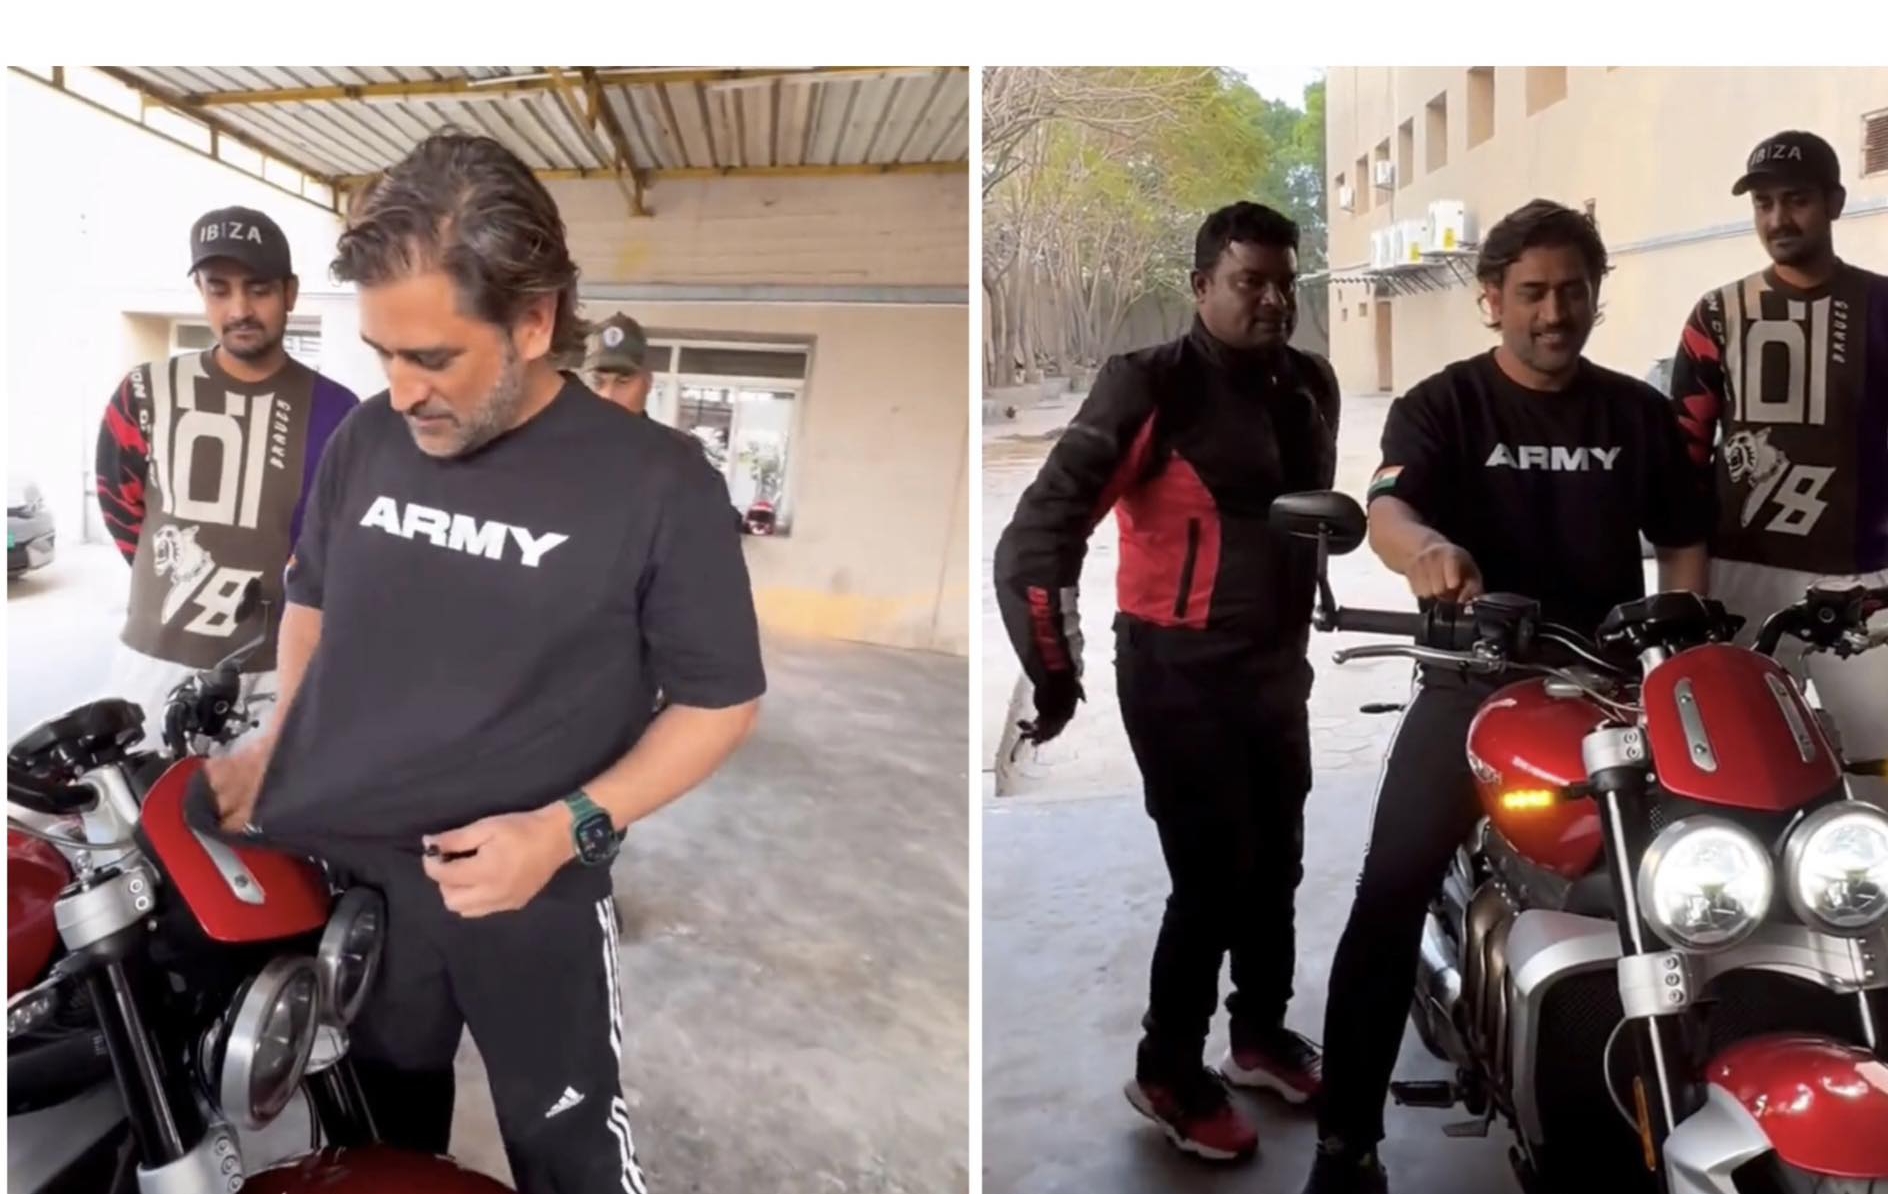 [WATCH] MS Dhoni Gives Autograph On A Fan’s Bike; Video Goes Viral